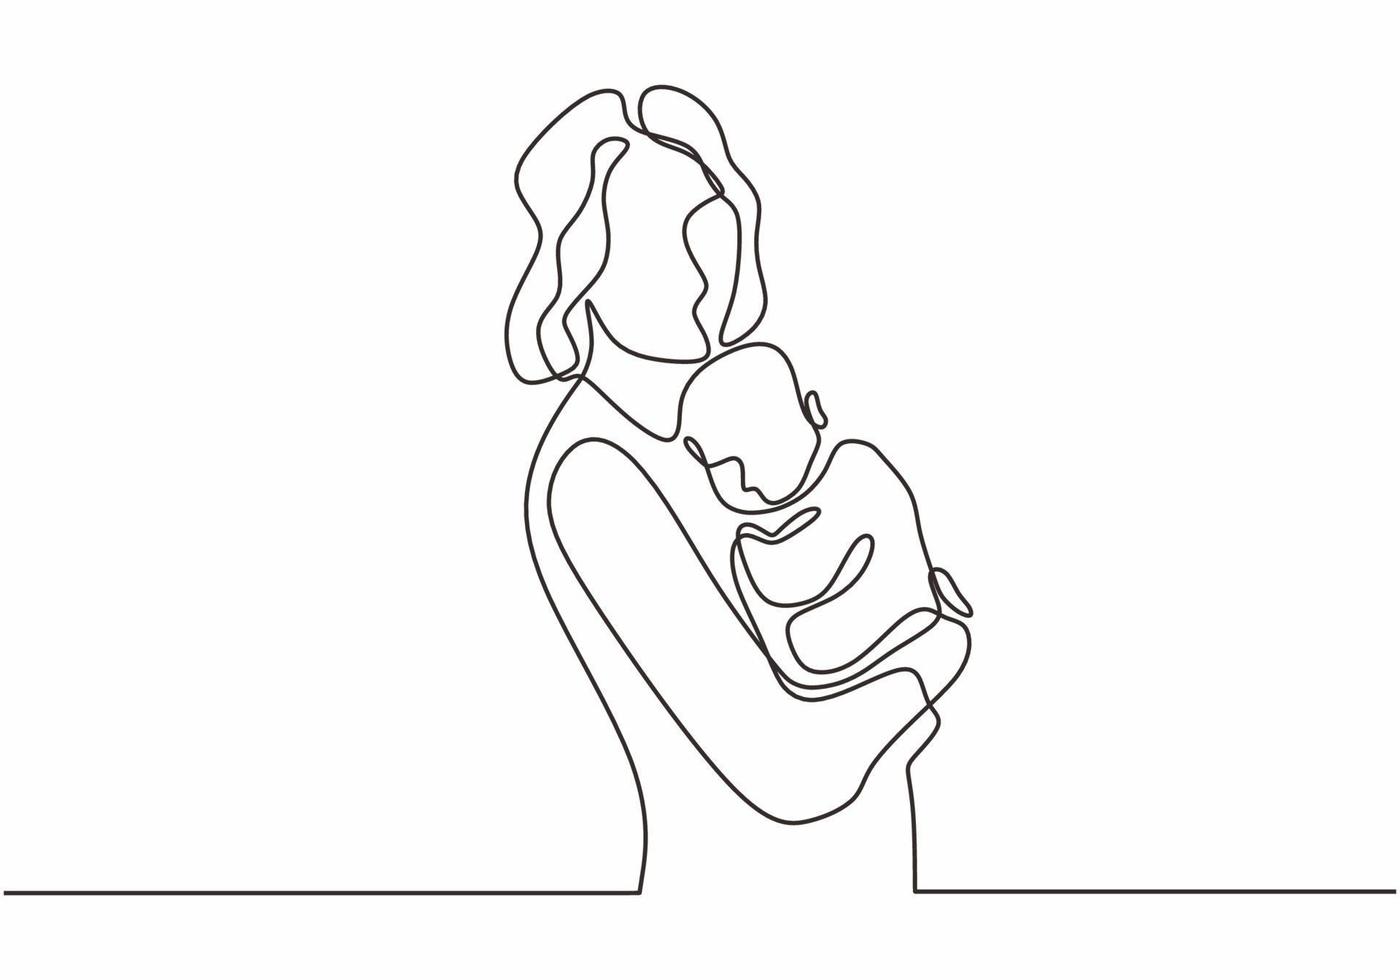 Happy Mom and baby continuous line drawing vector illustration